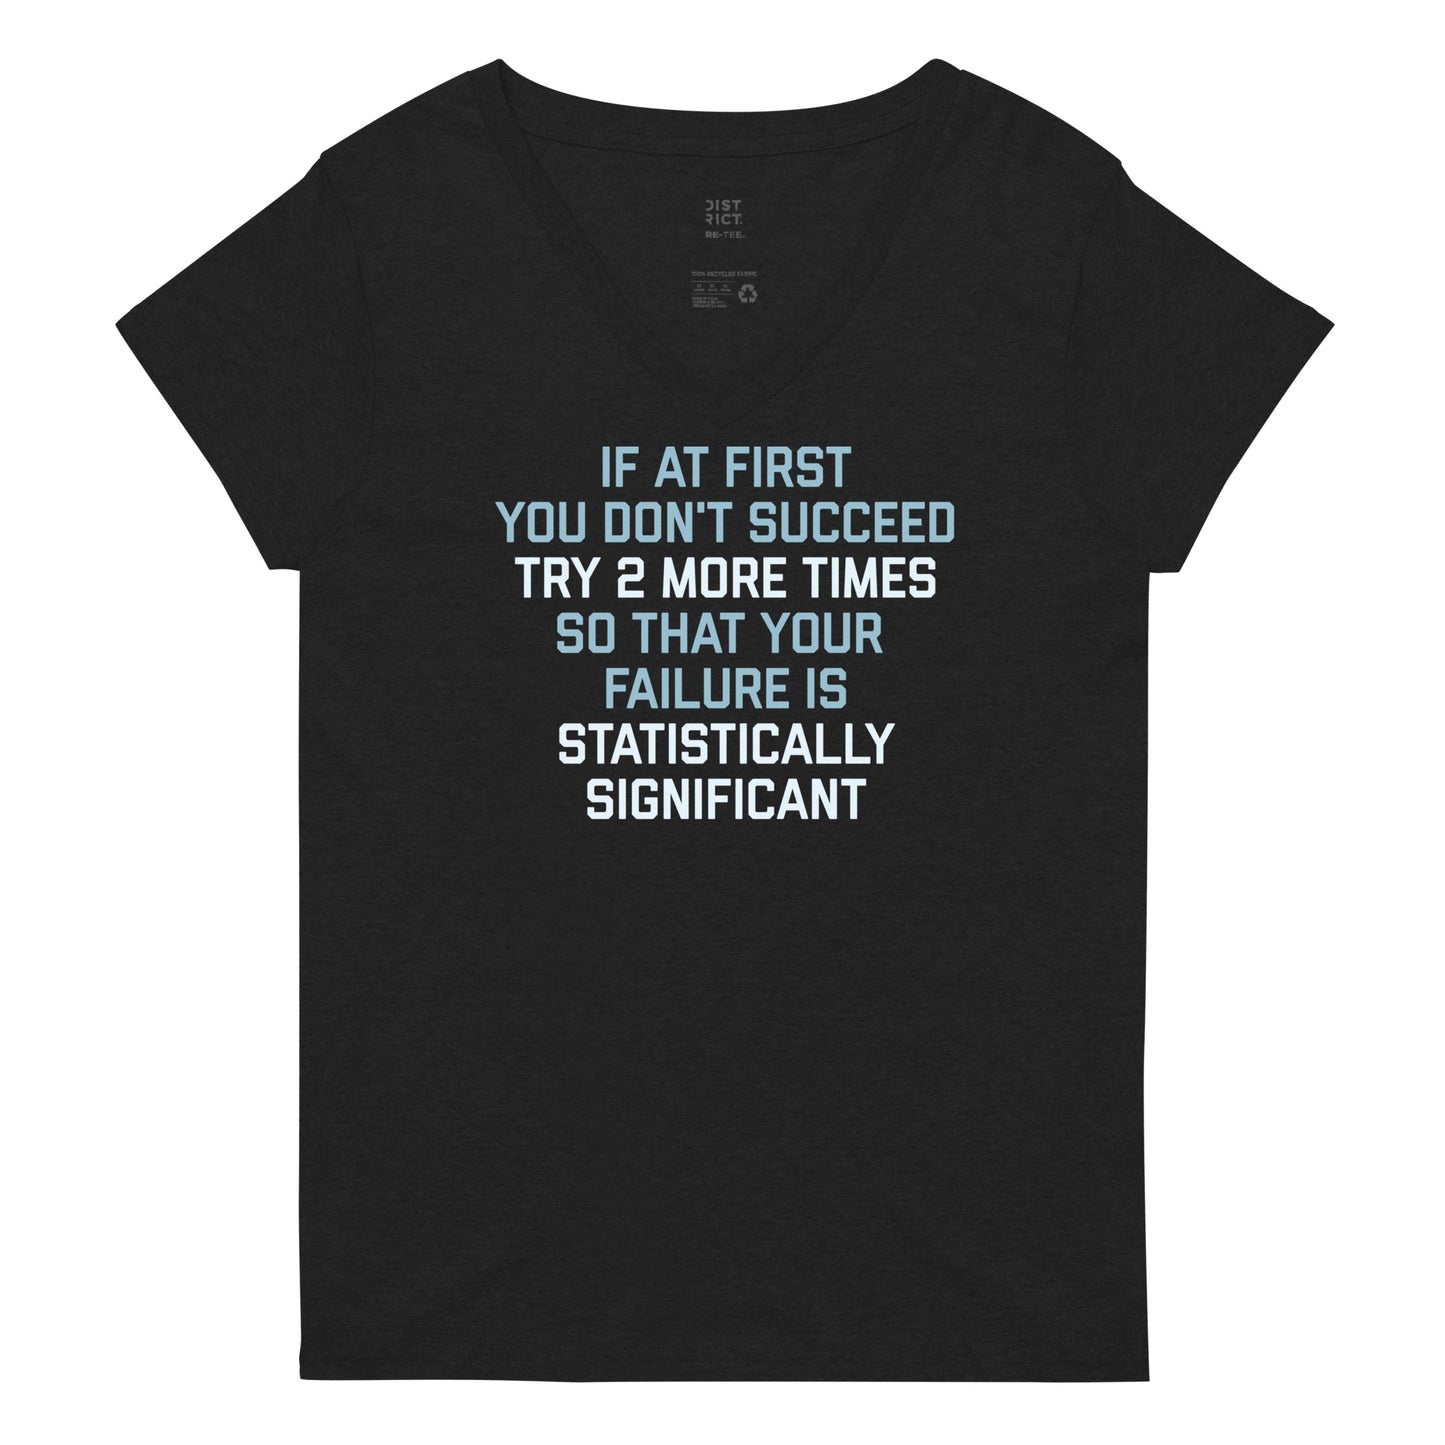 Try 2 More Times So That Your Failure Is Statistically Significant Women's V-Neck Tee